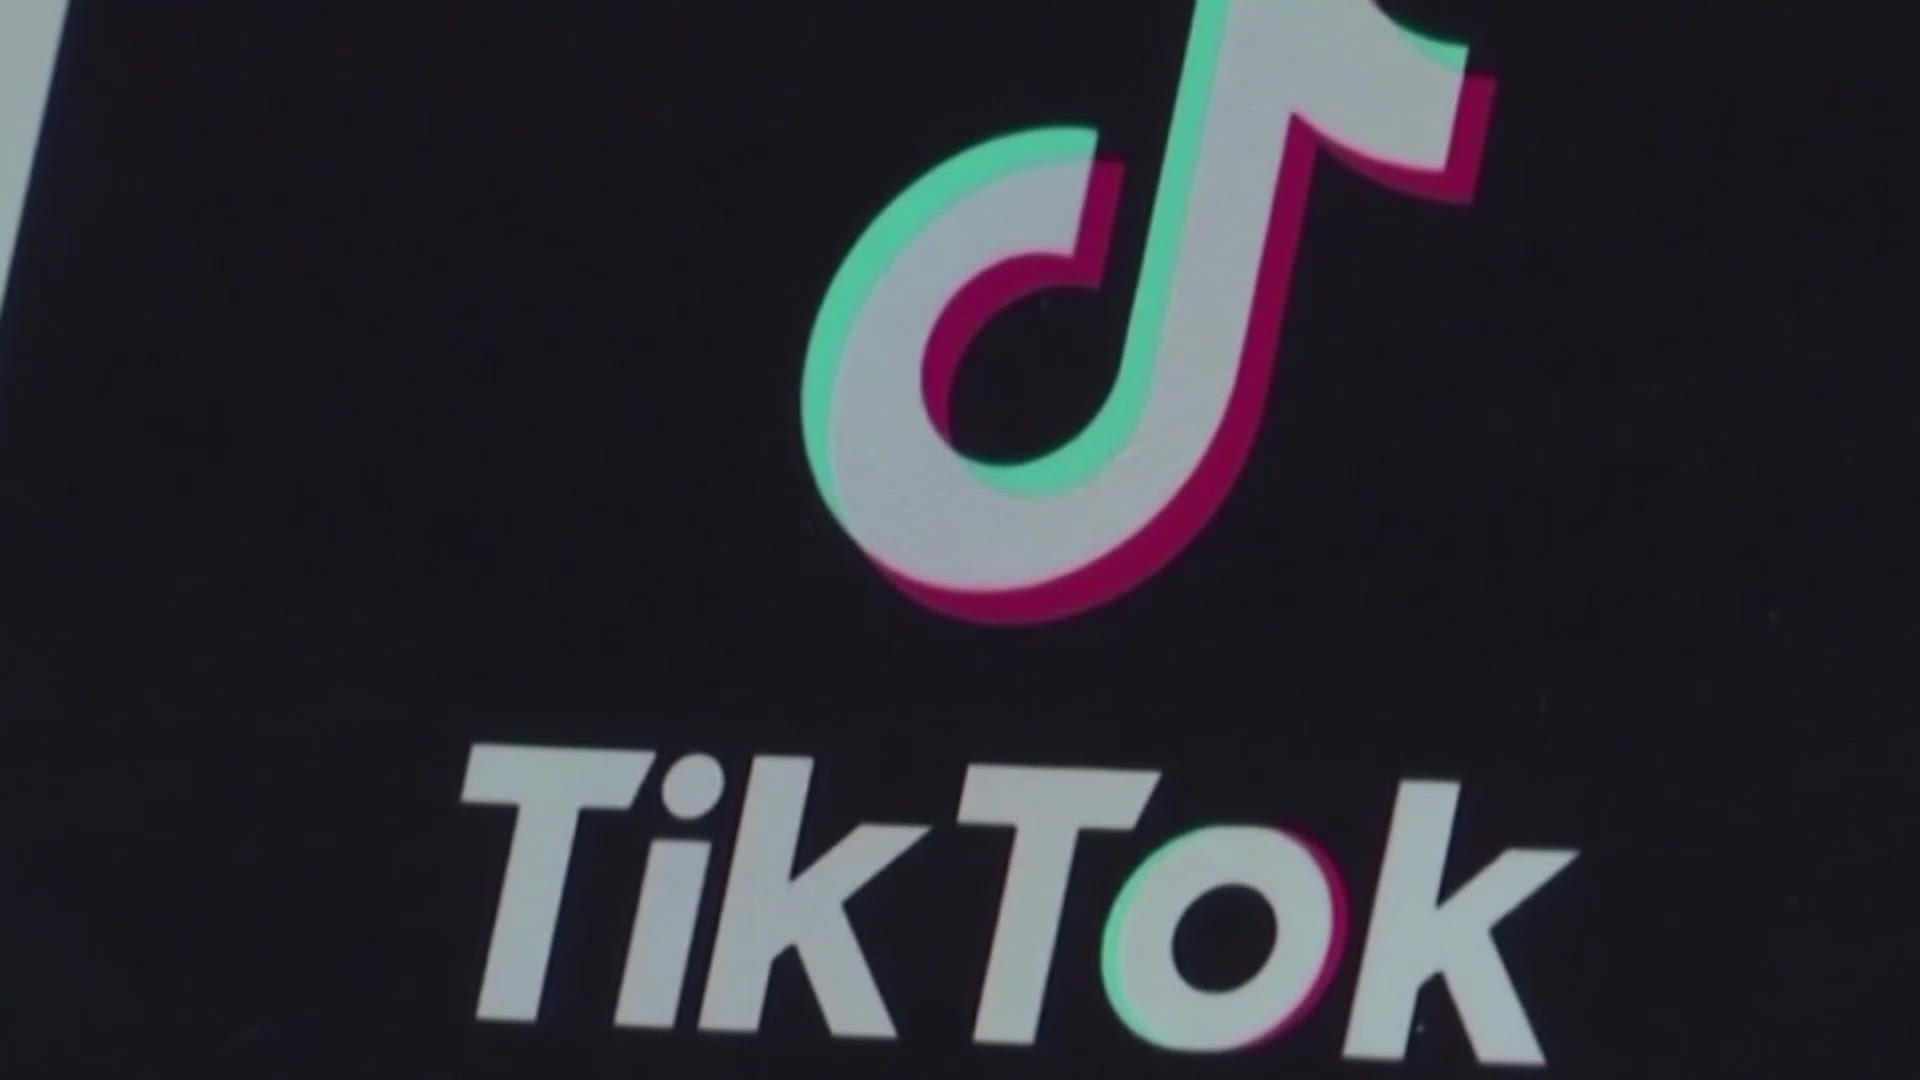 The decisions come after Gov. Abbott's directive that orders all Texas state agencies to ban the use of TikTok on any government-issued device.